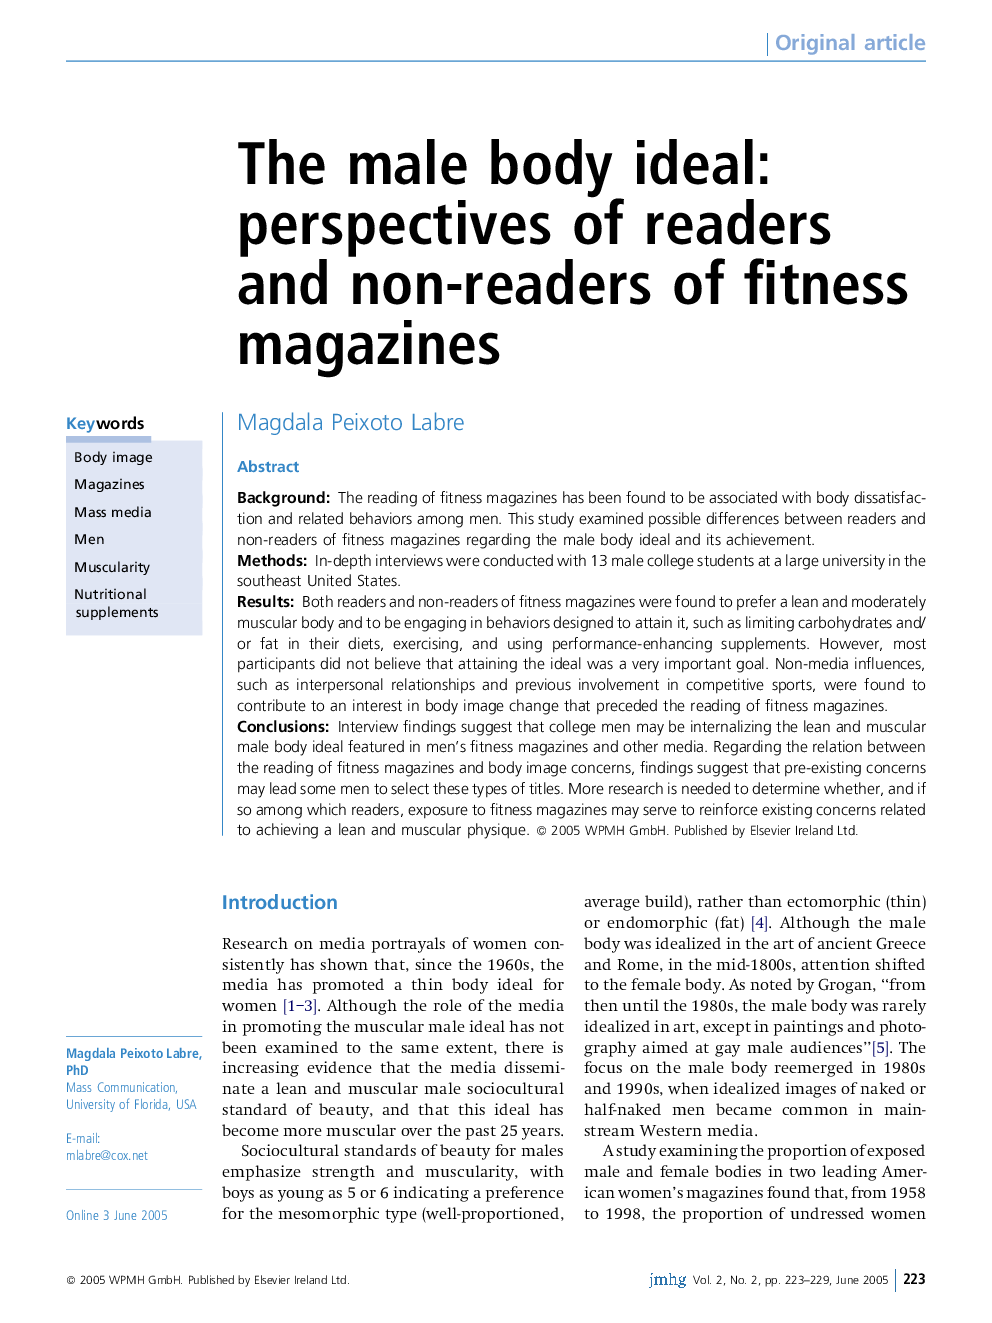 The male body ideal: perspectives of readers and non-readers of fitness magazines